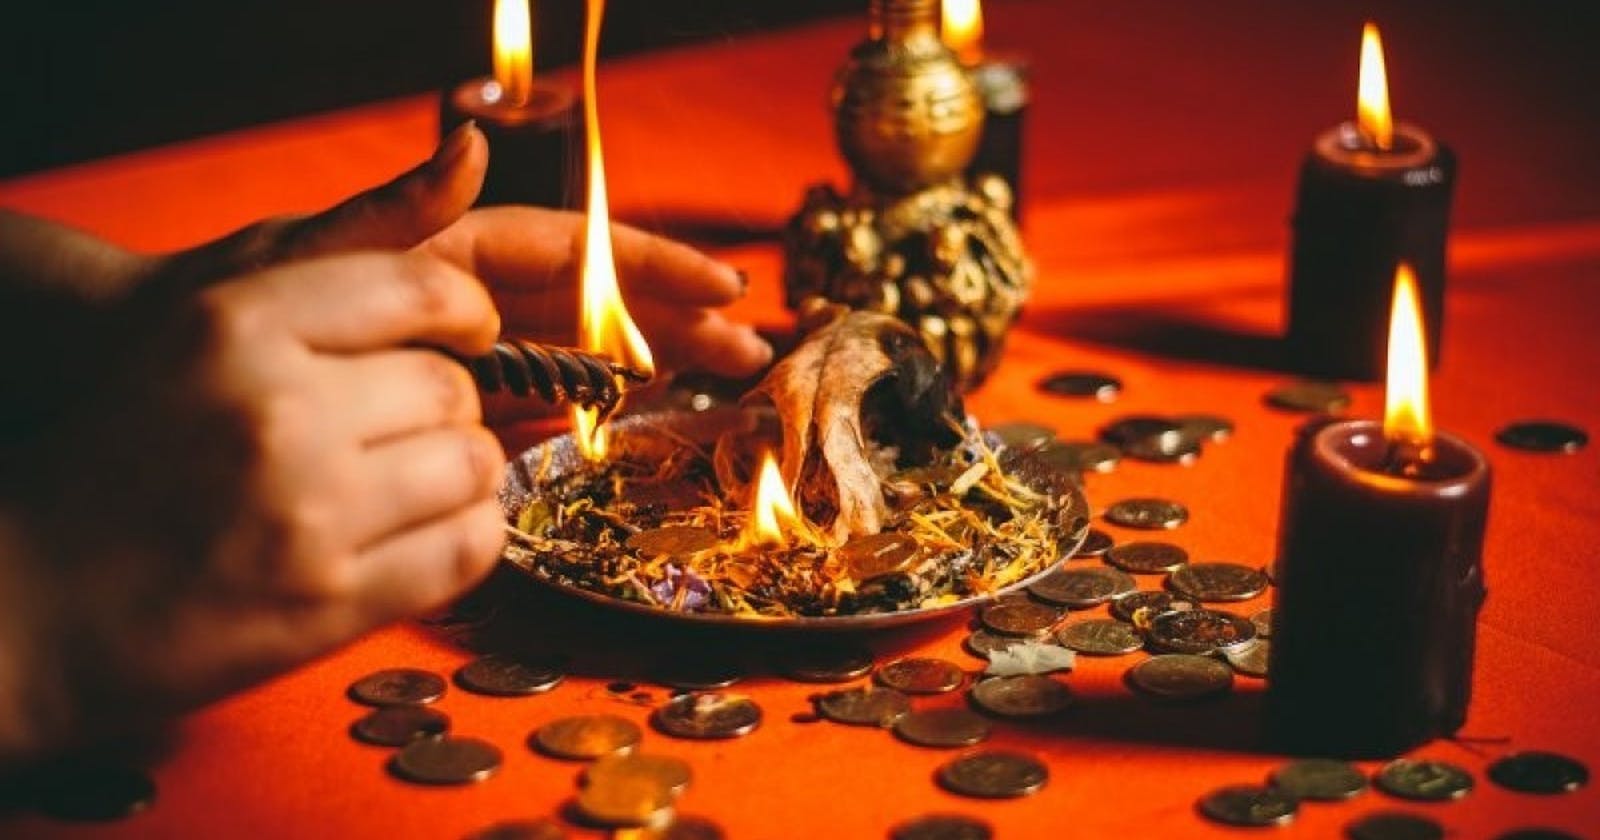 Voodoo Spell In Ashmyany
Town in Belarus, Bring Ex Love Back In Durban Call ☏ +27656842680 Traditional Love Spell Caster In Cape Town South Africa